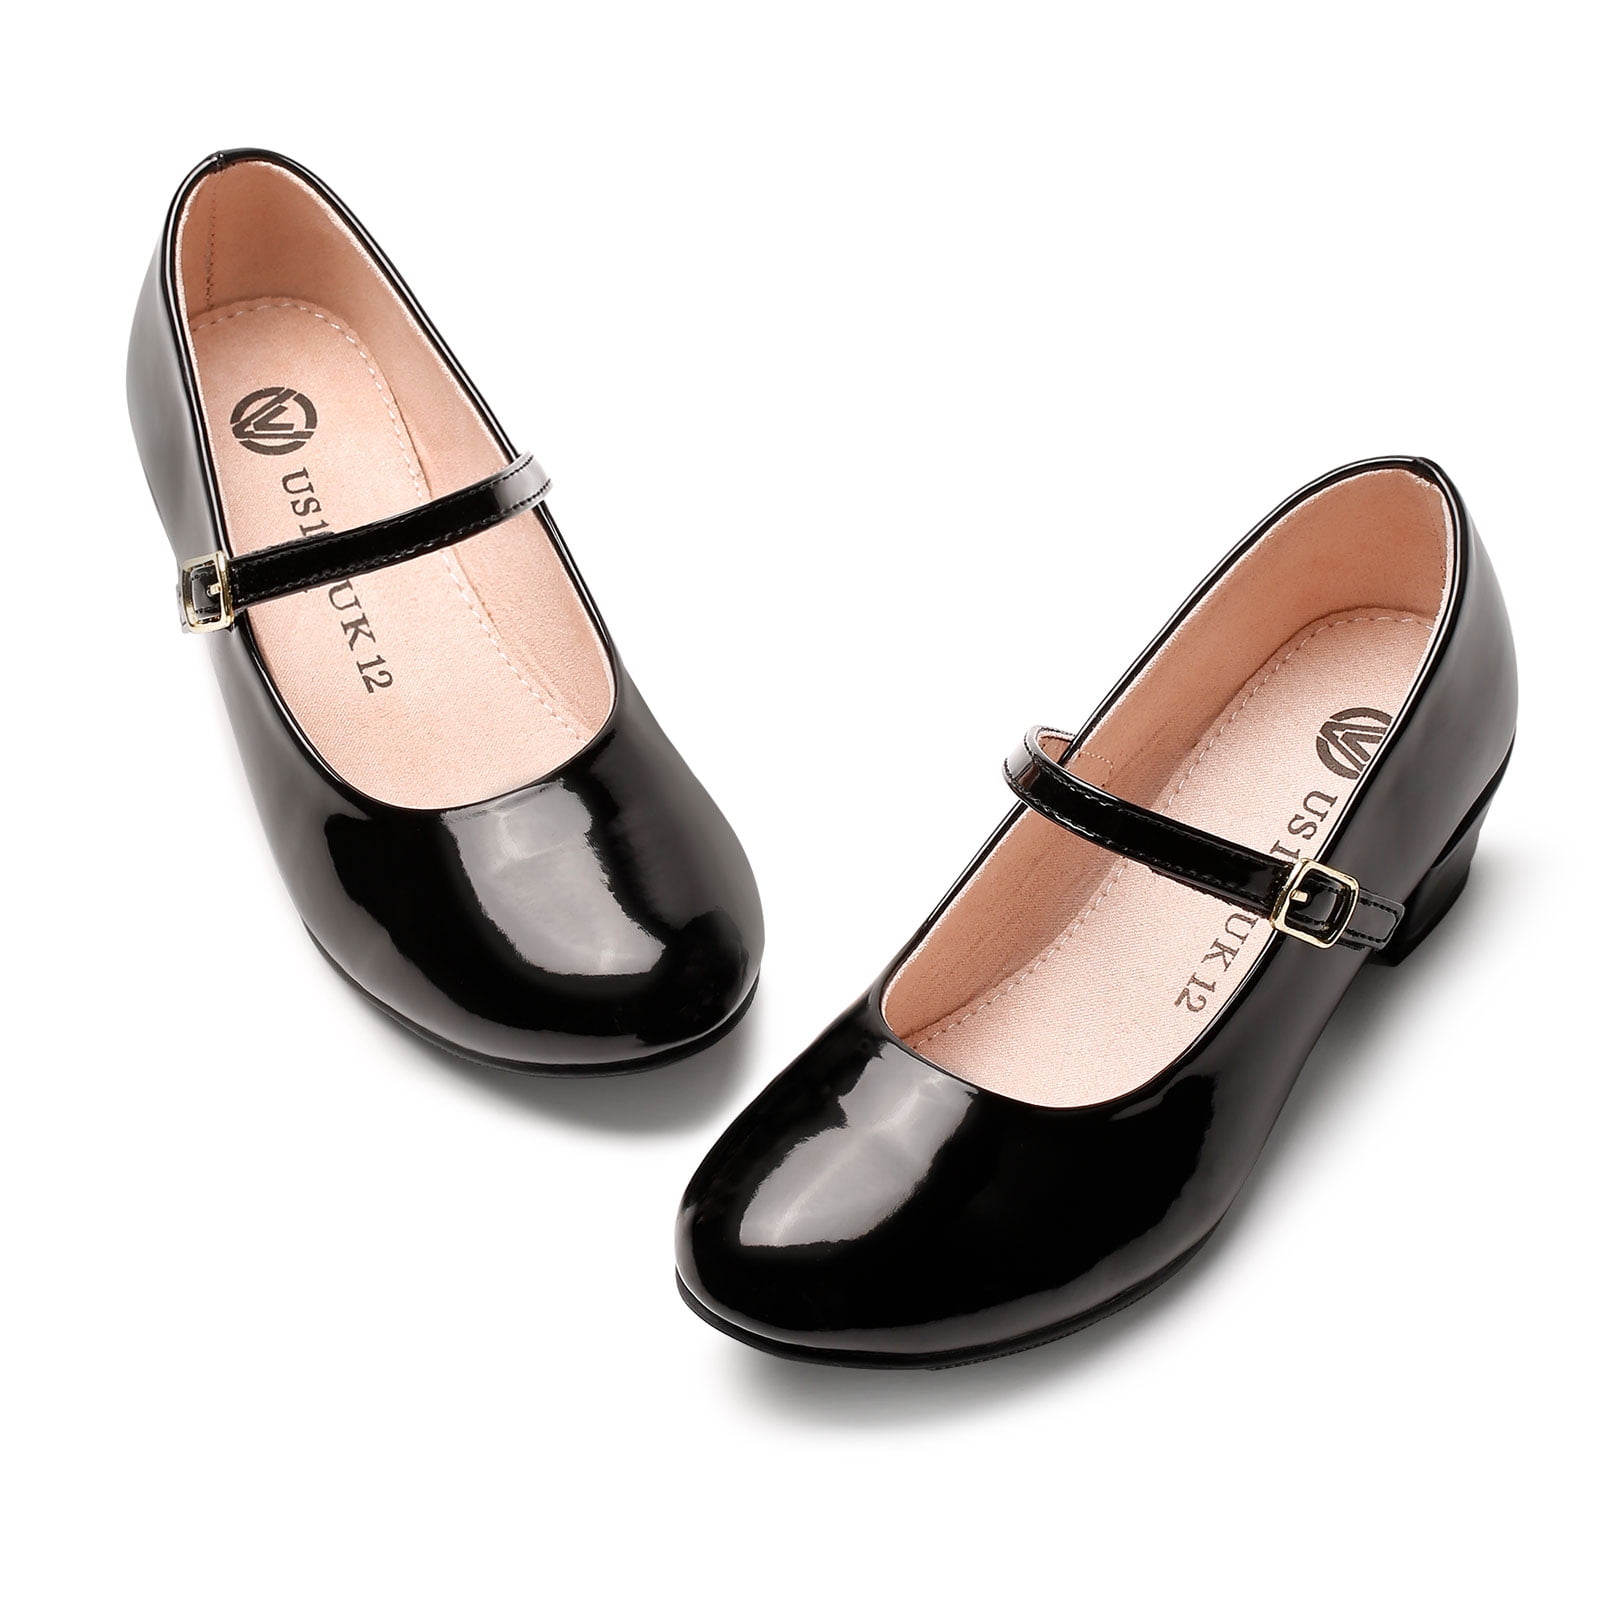 Powder pink leather ballet flats with high heel and patent toe - Ballerette